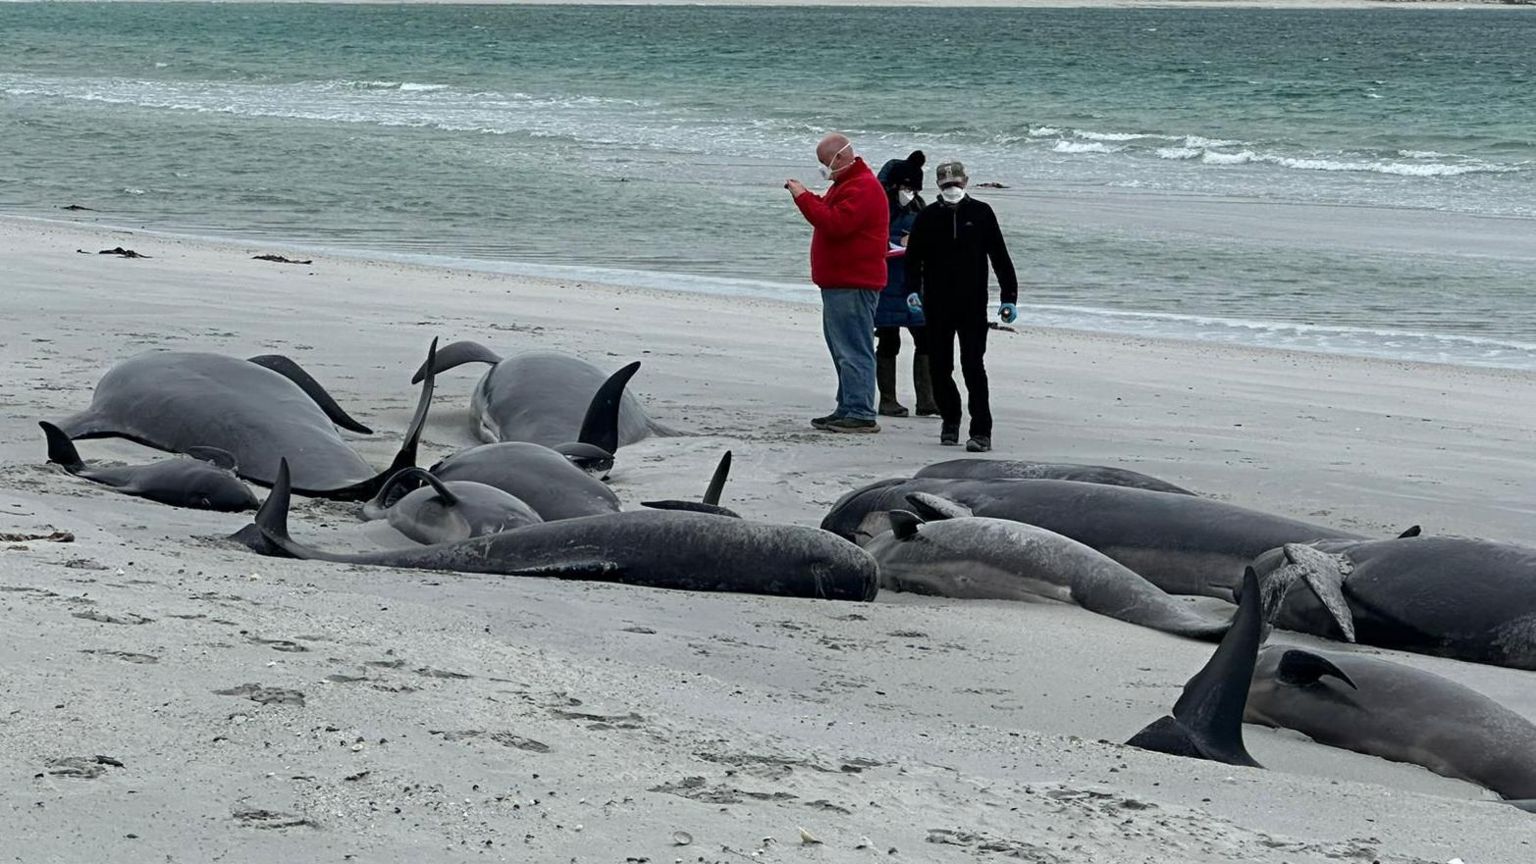 Experts access the dozens of whales on Tresness Beach